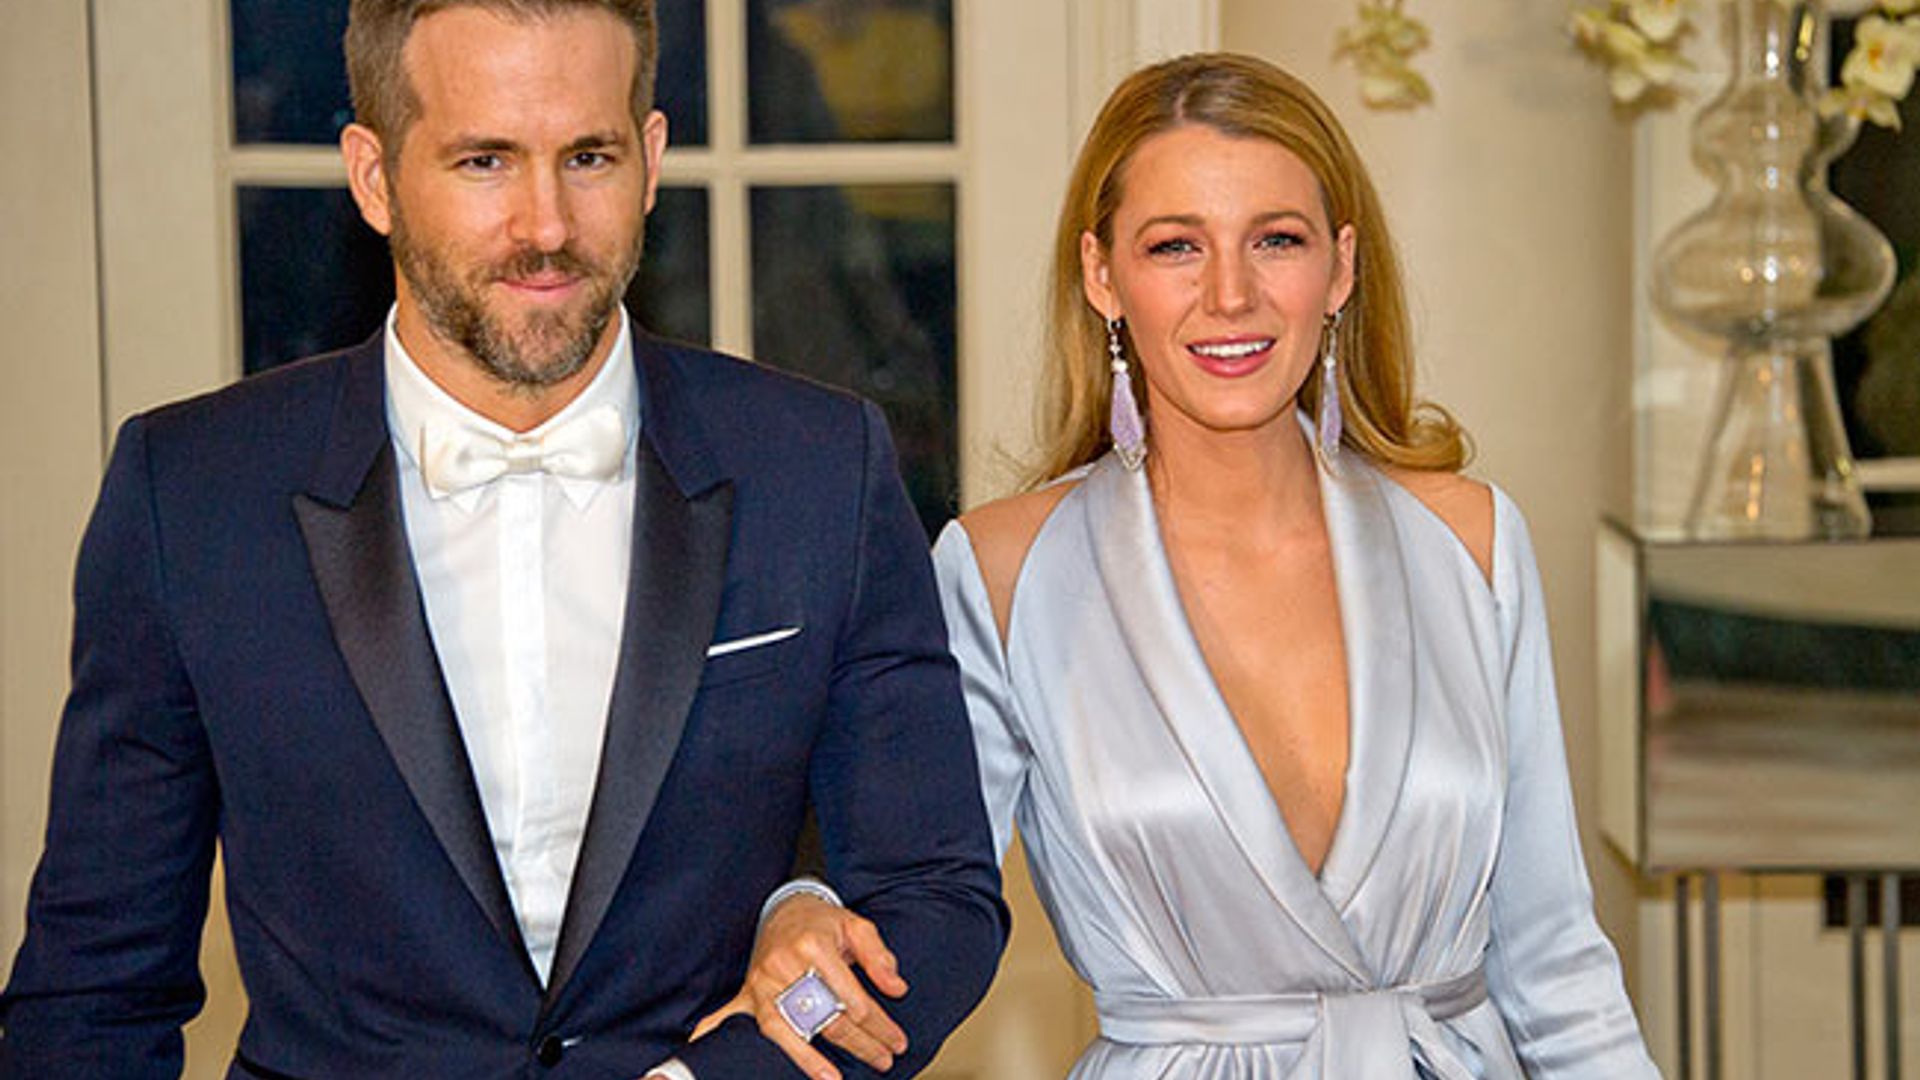 Ryan Reynolds gives Blake Lively's style his seal of approval